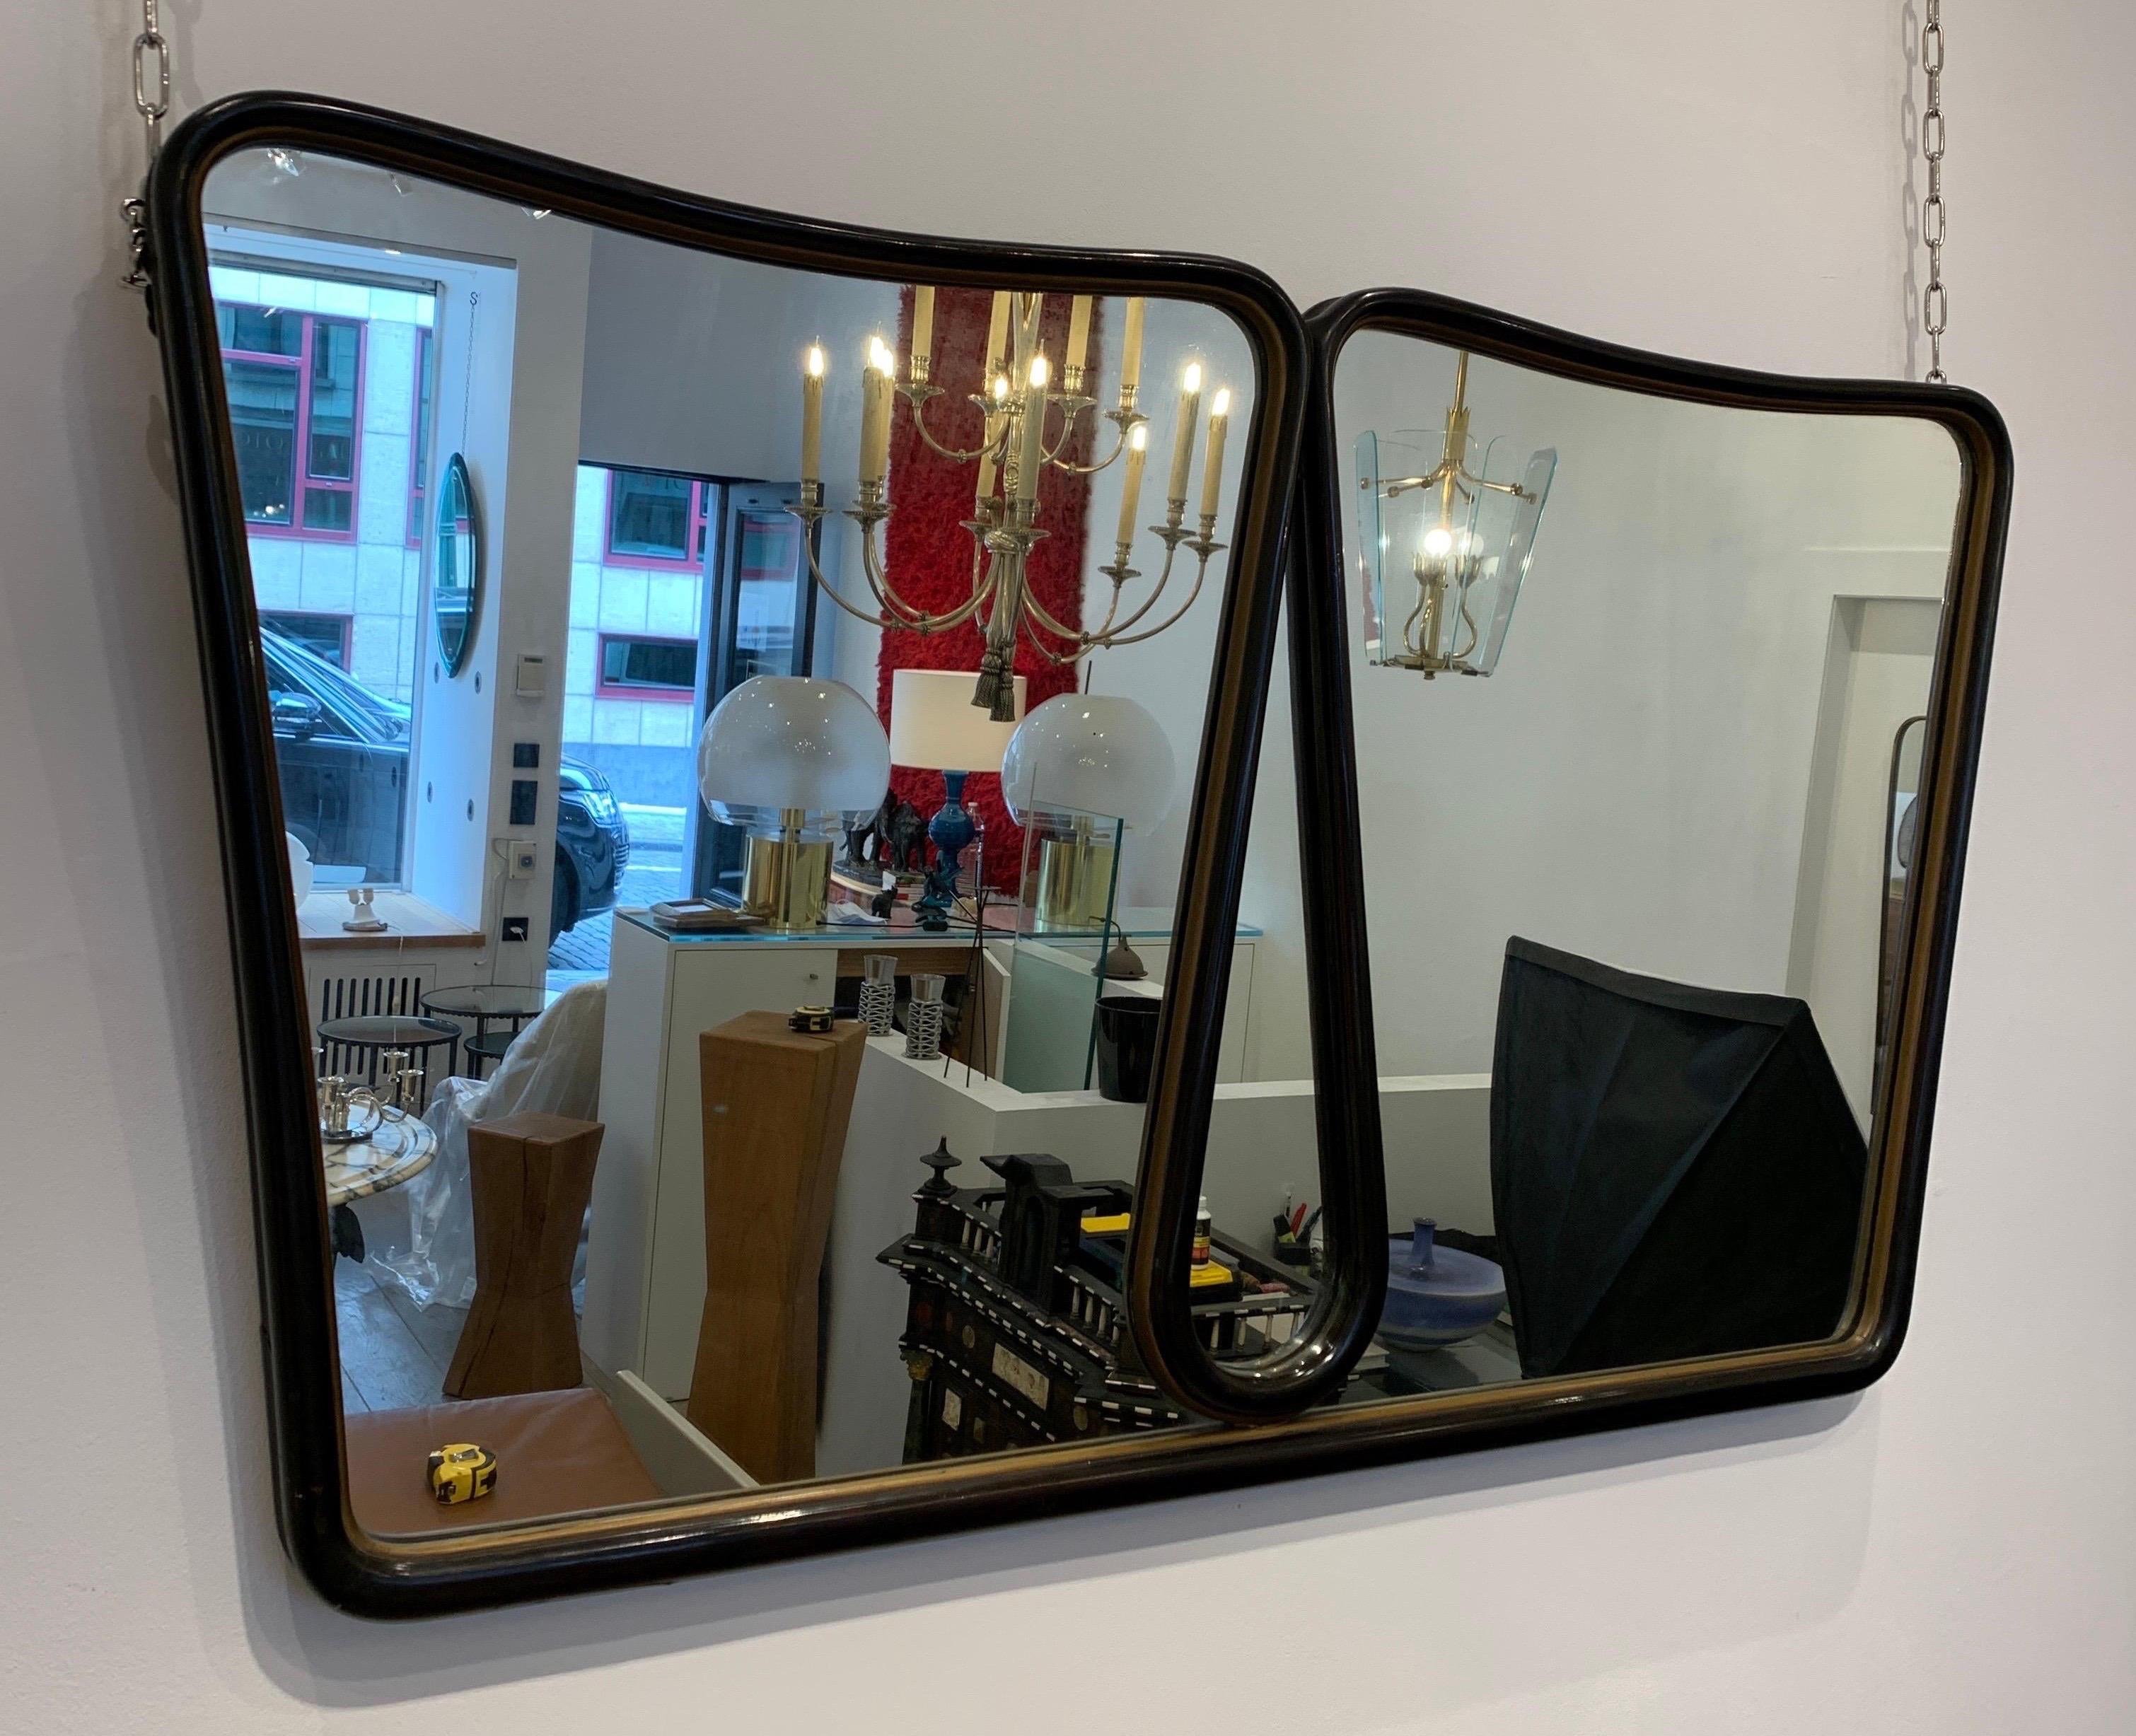 The mirror is attributed to the Italian designer Guglielmo Ulrich. The design of this piece, though not documented, is very similar to its style. It dates around 1940s.